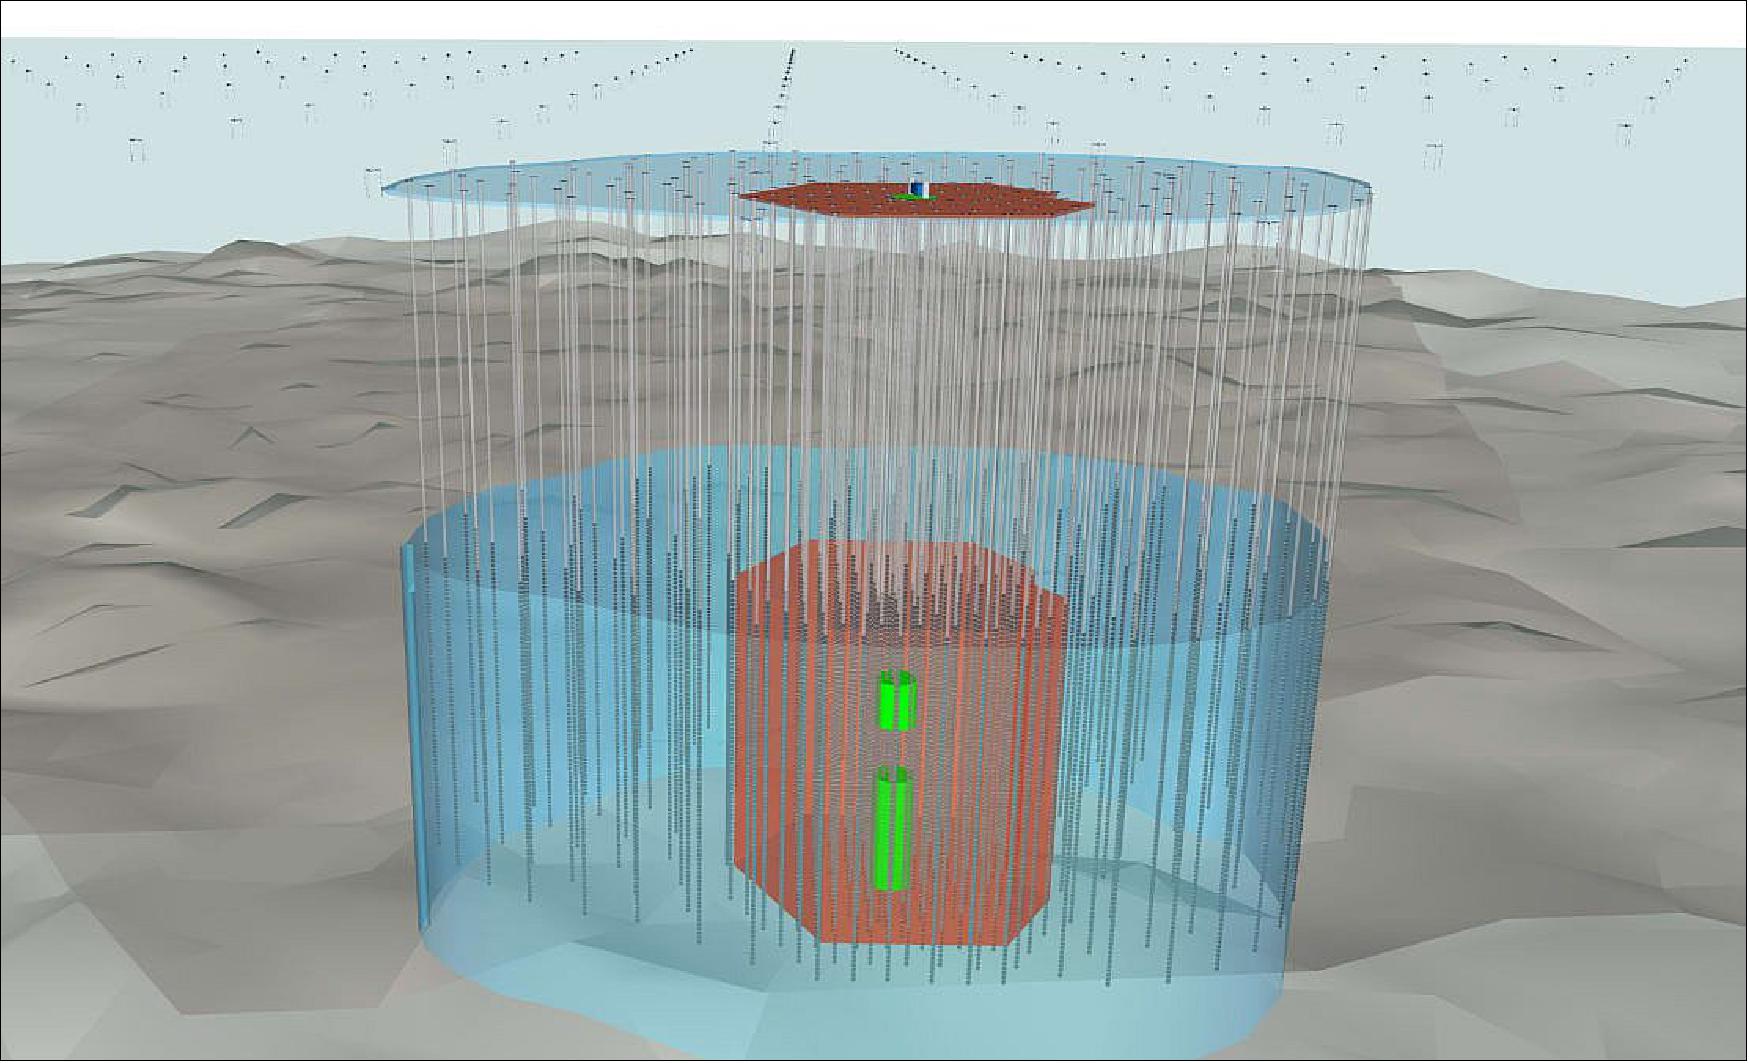 Figure 14: Schematic drawing of the IceCube-Gen2 facility, including the optical array (blue shaded region) that contains IceCube (red shaded region) and a more densely instrumented core that will have additional sensors added in the next few years as part of the IceCube Upgrade project underway (green shaded region), image credit: IceCube Collaboration